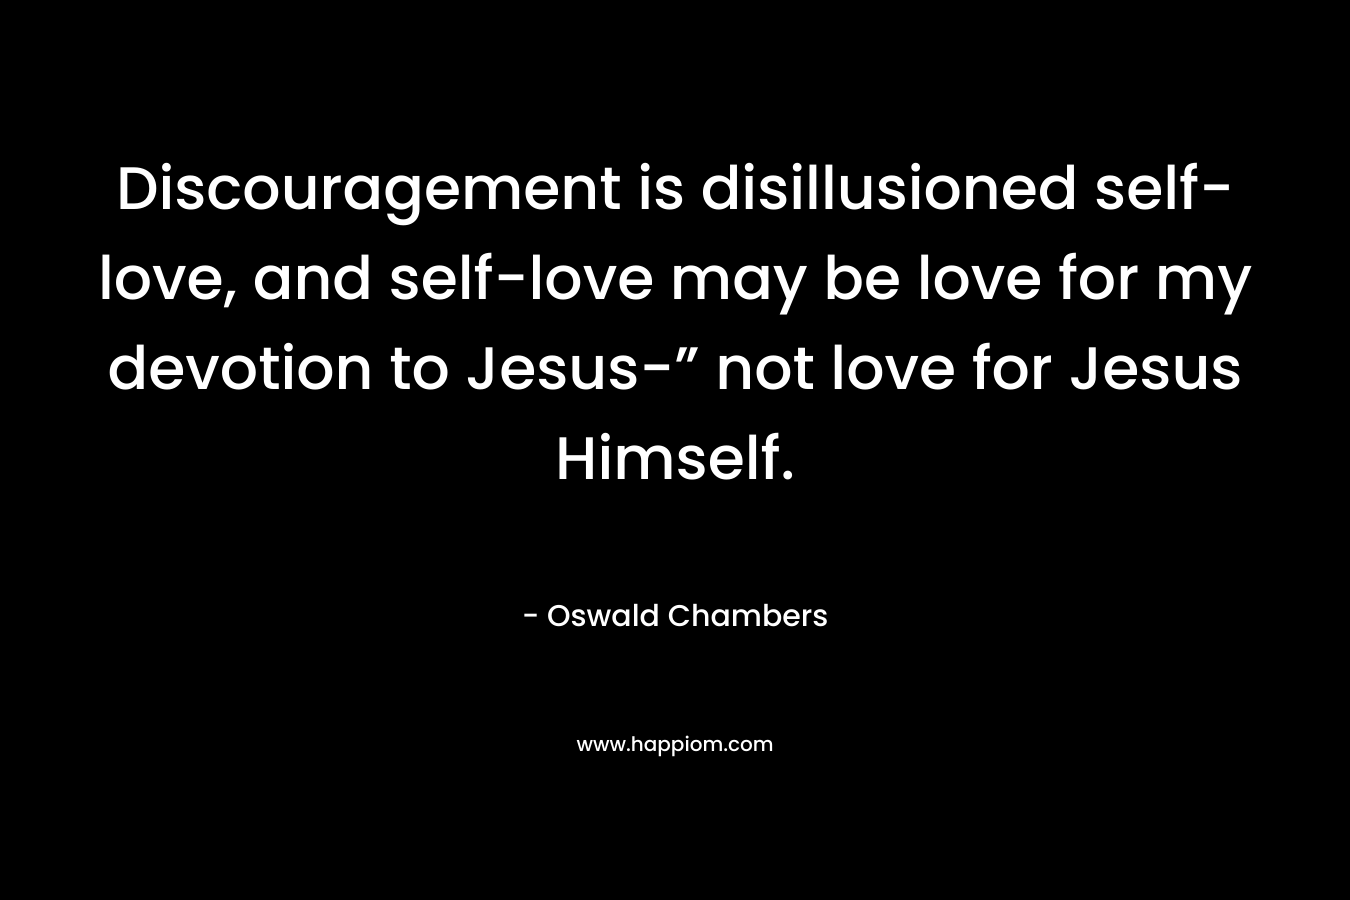 Discouragement is disillusioned self-love, and self-love may be love for my devotion to Jesus-” not love for Jesus Himself.